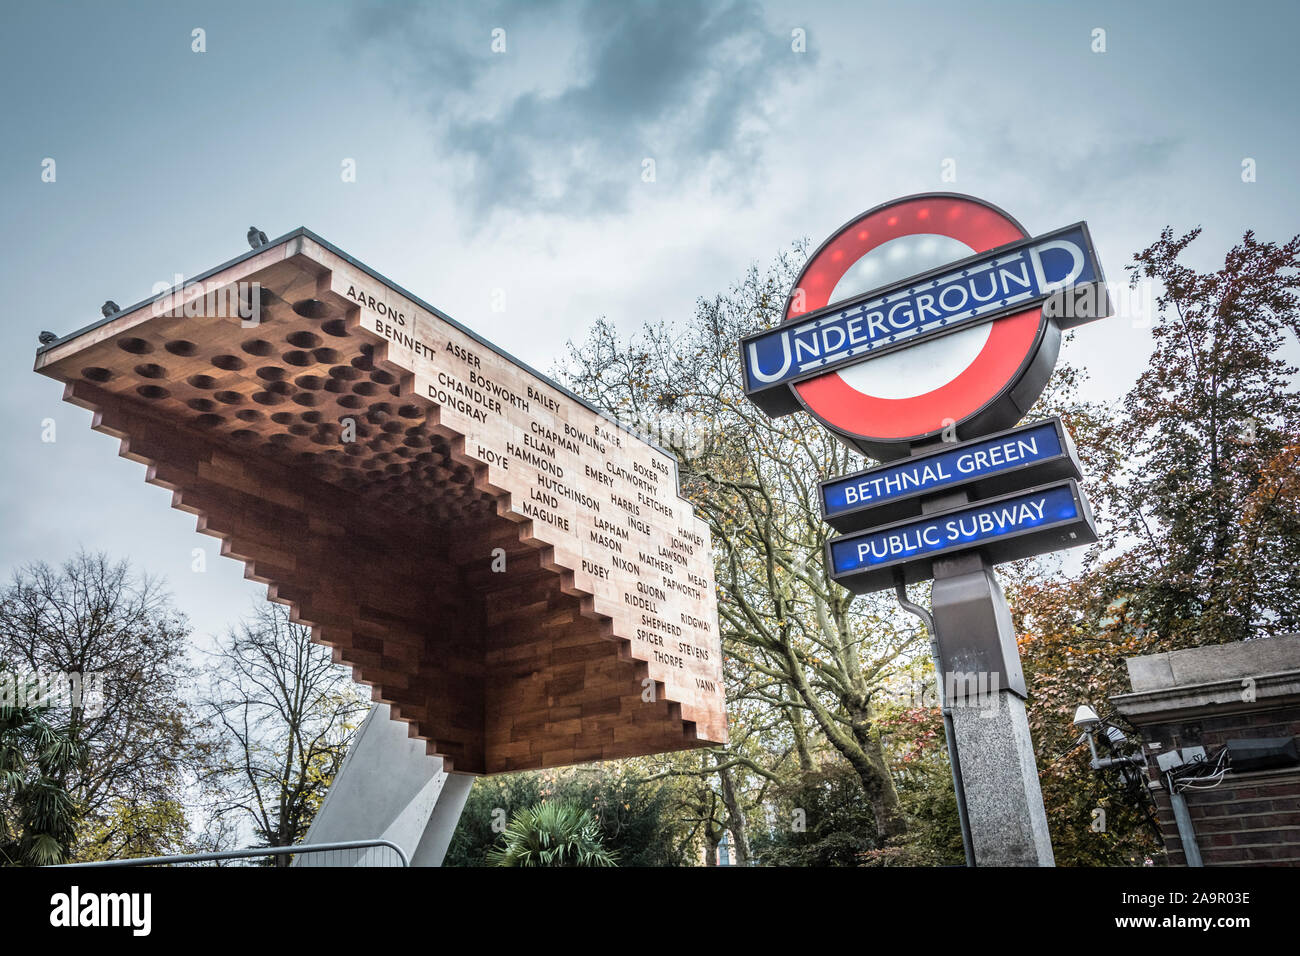 Bethnal Green Public Subway Memorial by Arboreal Architecture, Bethnal Green Underground Station, Londra, Inghilterra, Regno Unito Foto Stock